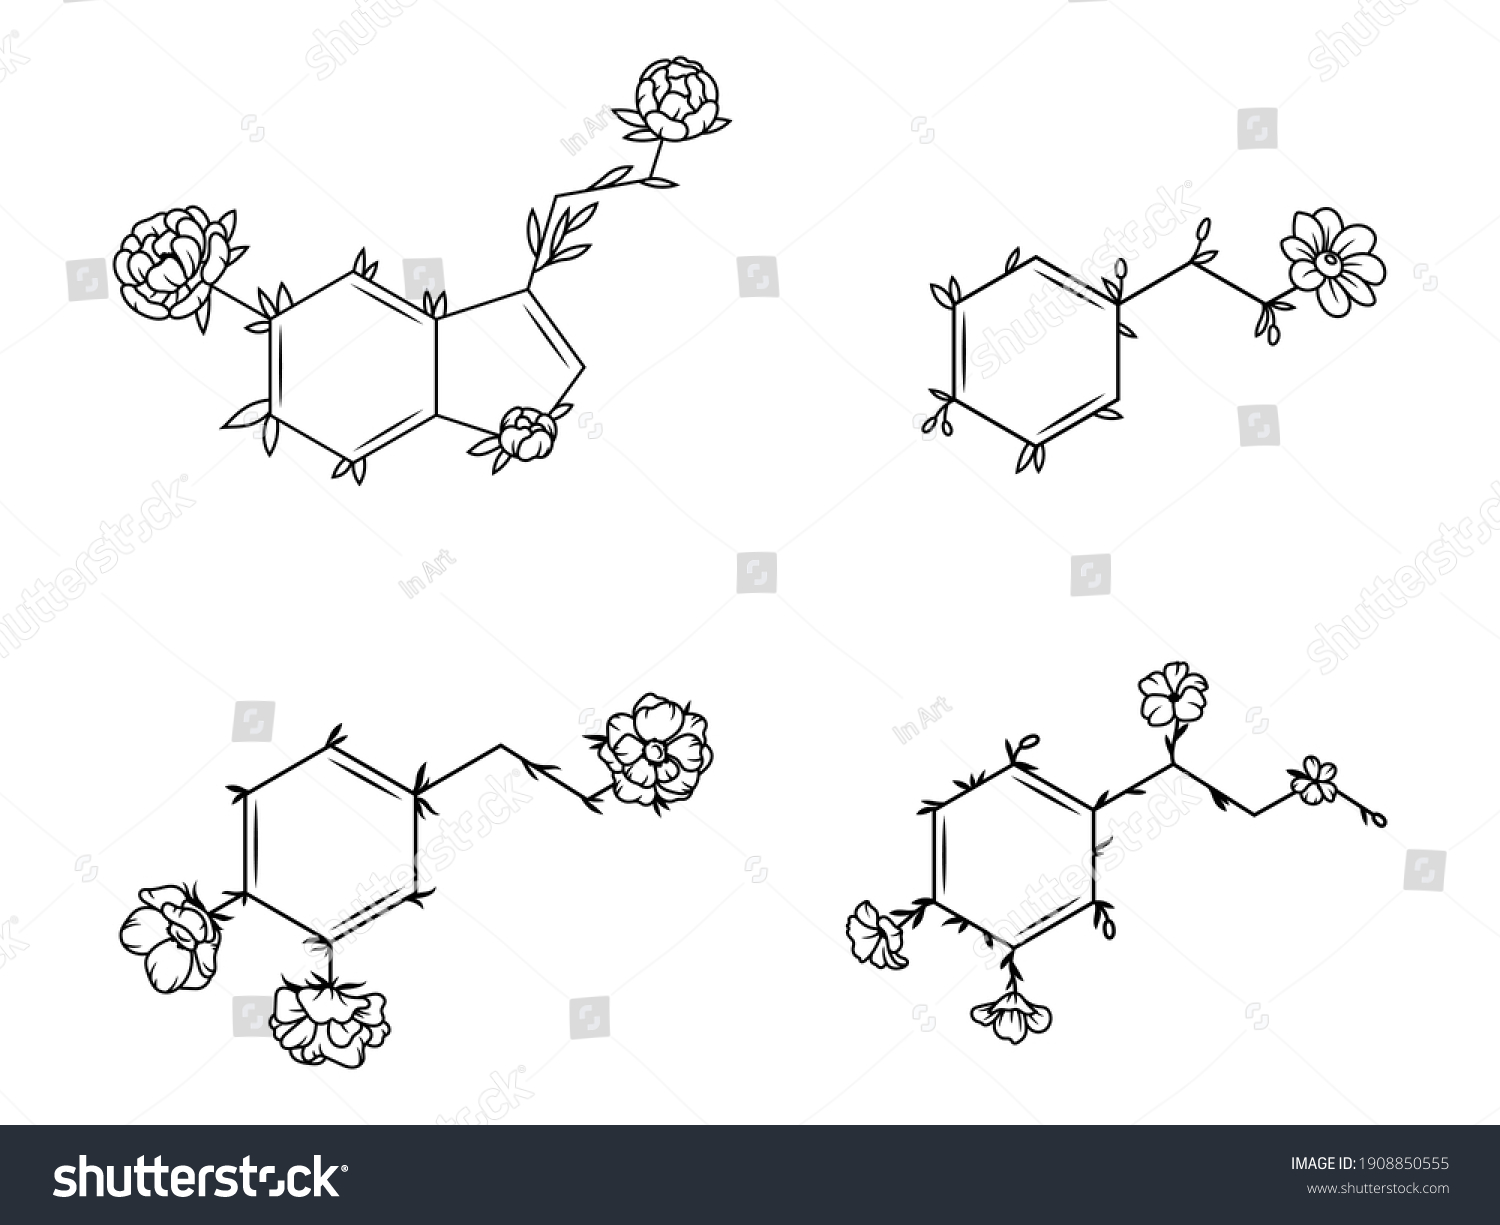 dna love science happy happiness chemistry dopamine flowers